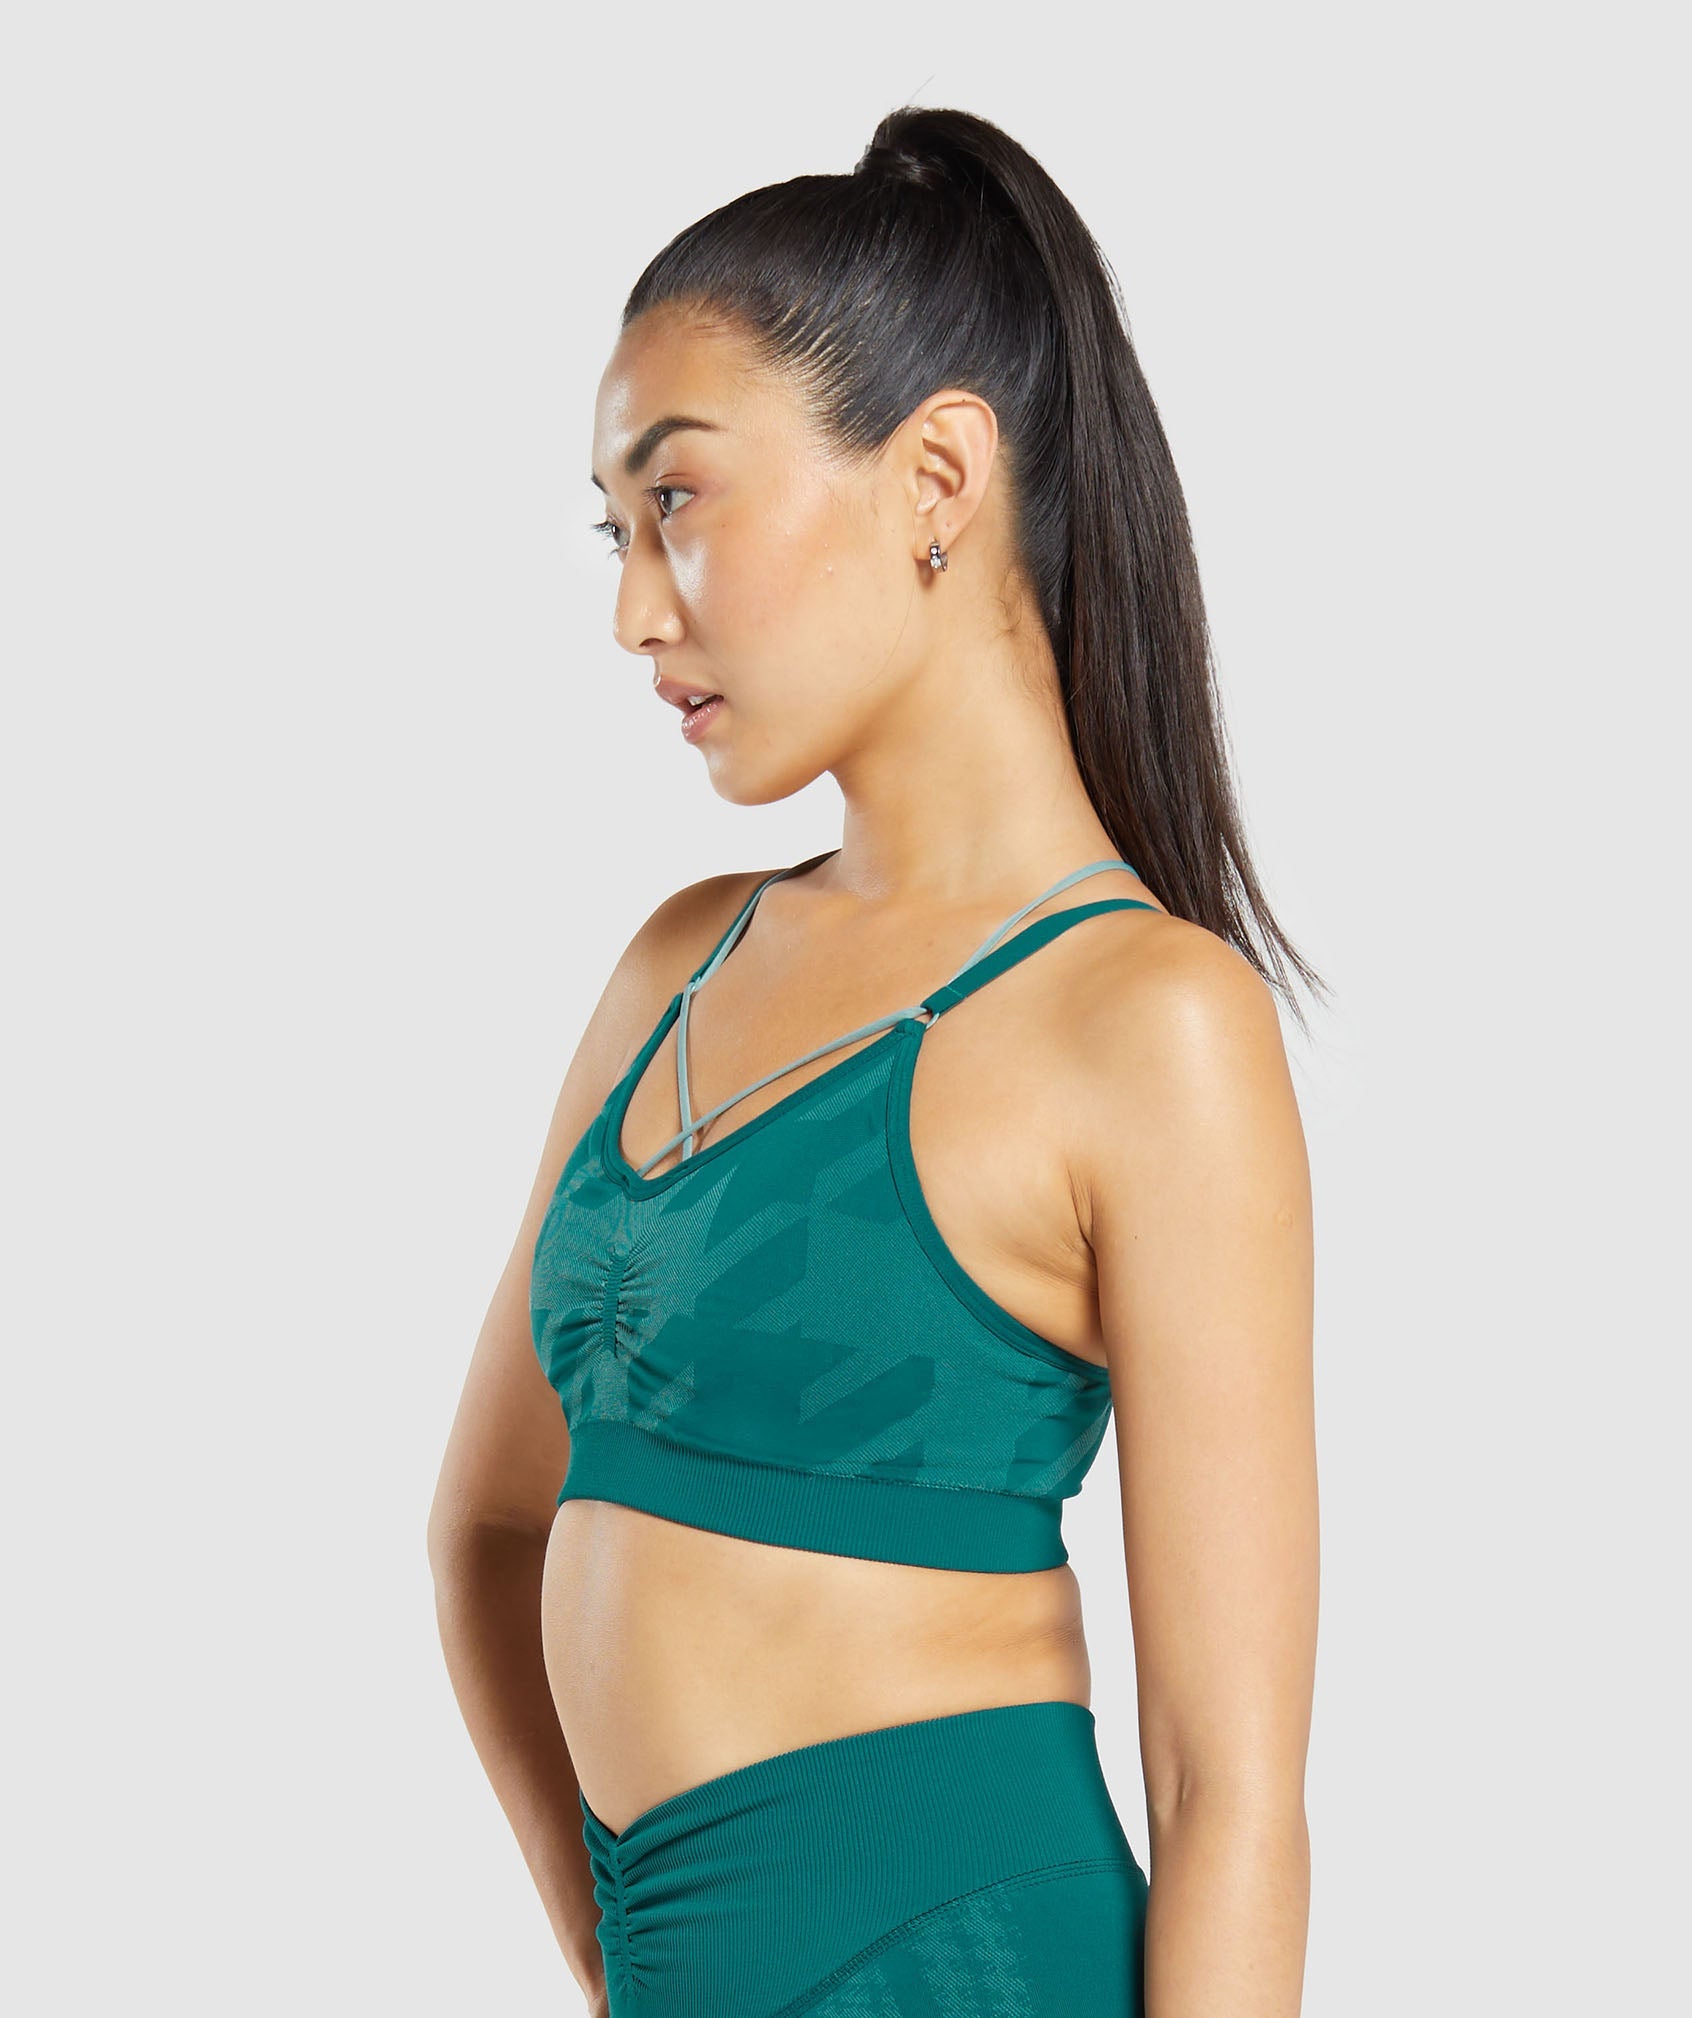 Apex Limit Seamless Ruched Sports Bra in Deep Teal/Duck Egg Blue - view 3